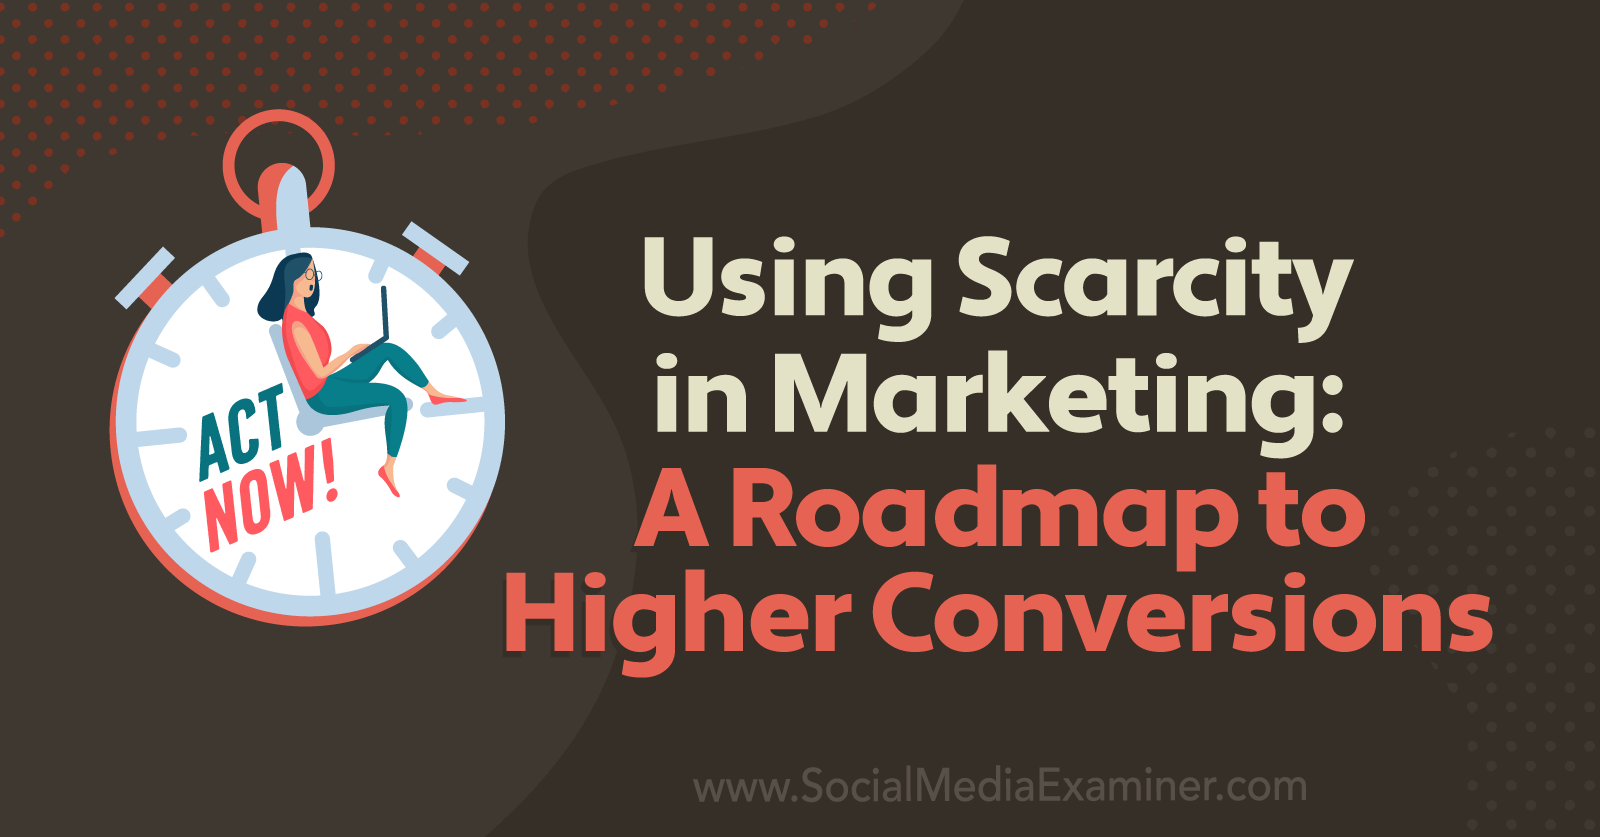 Using Scarcity in Marketing: A Roadmap to Higher Conversions by Social Media Examiner